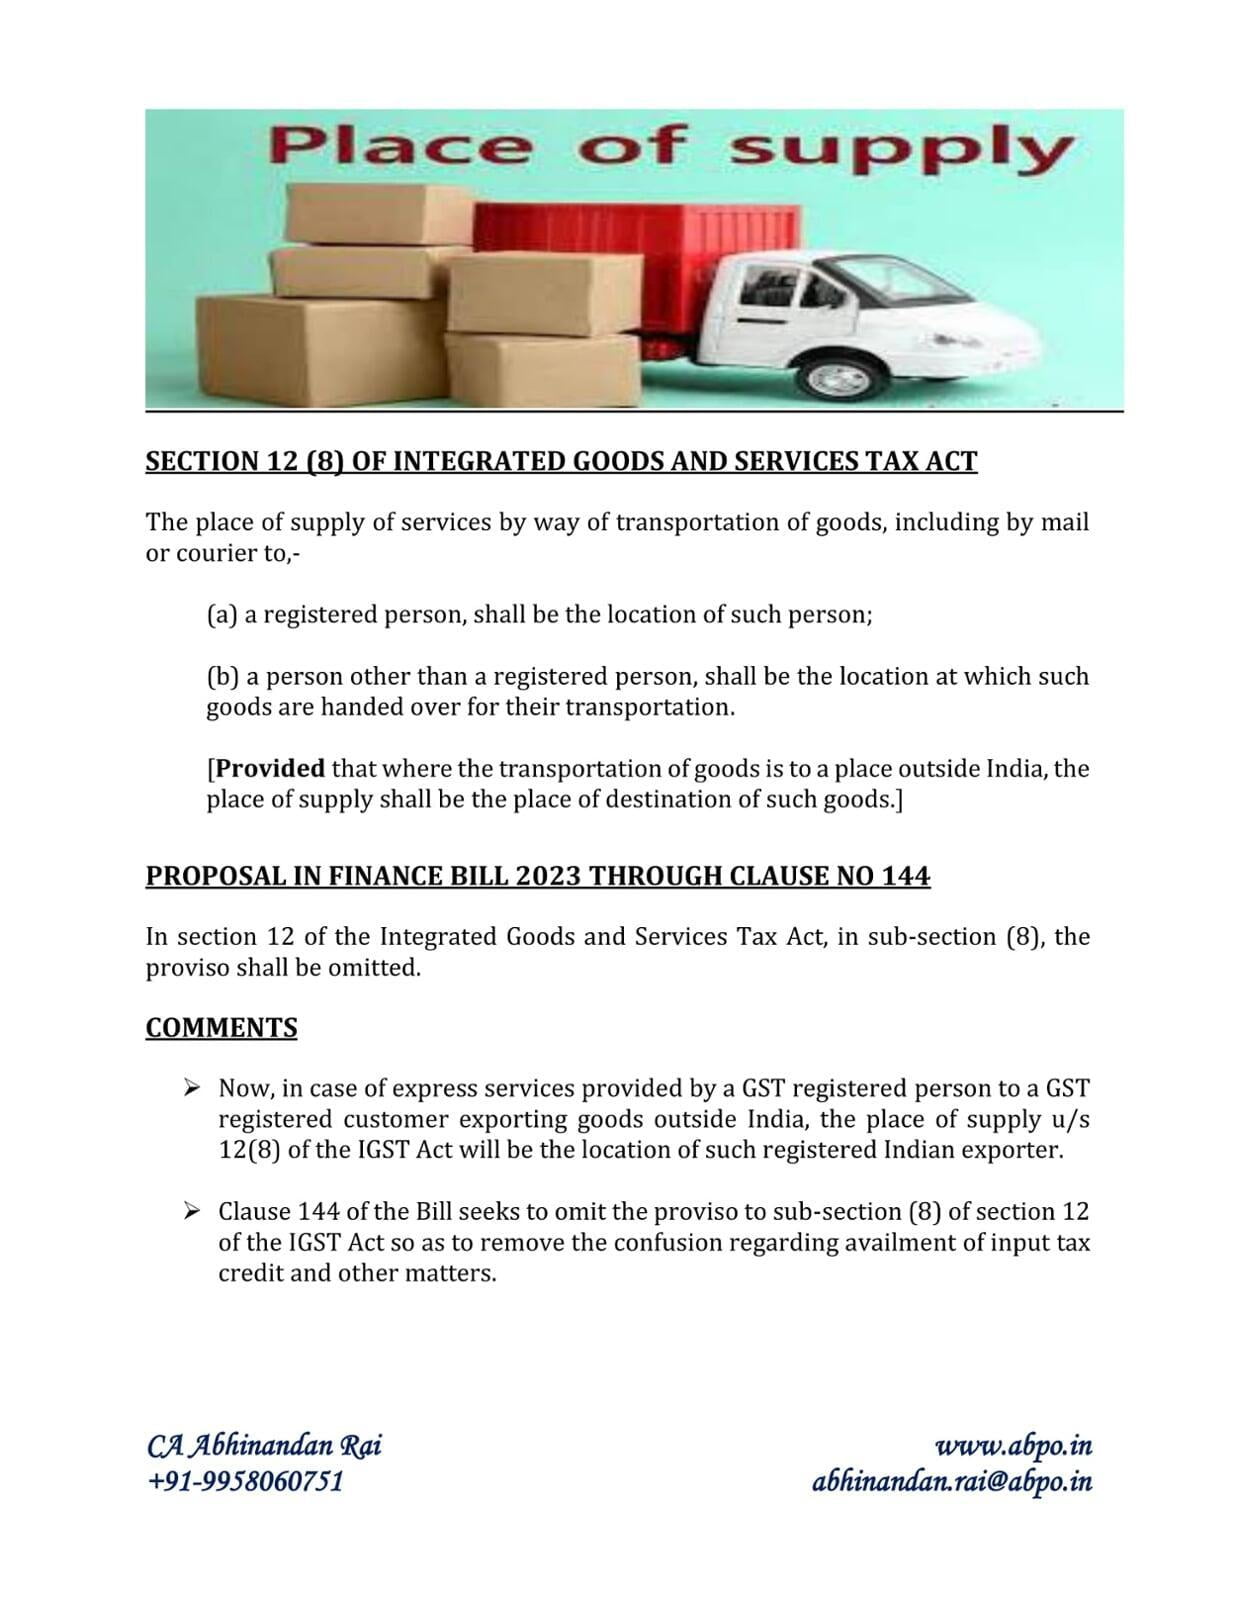 Proposal for change in place of supply of Services in case of Transportation of Goods outside India through Finance Bill 2023